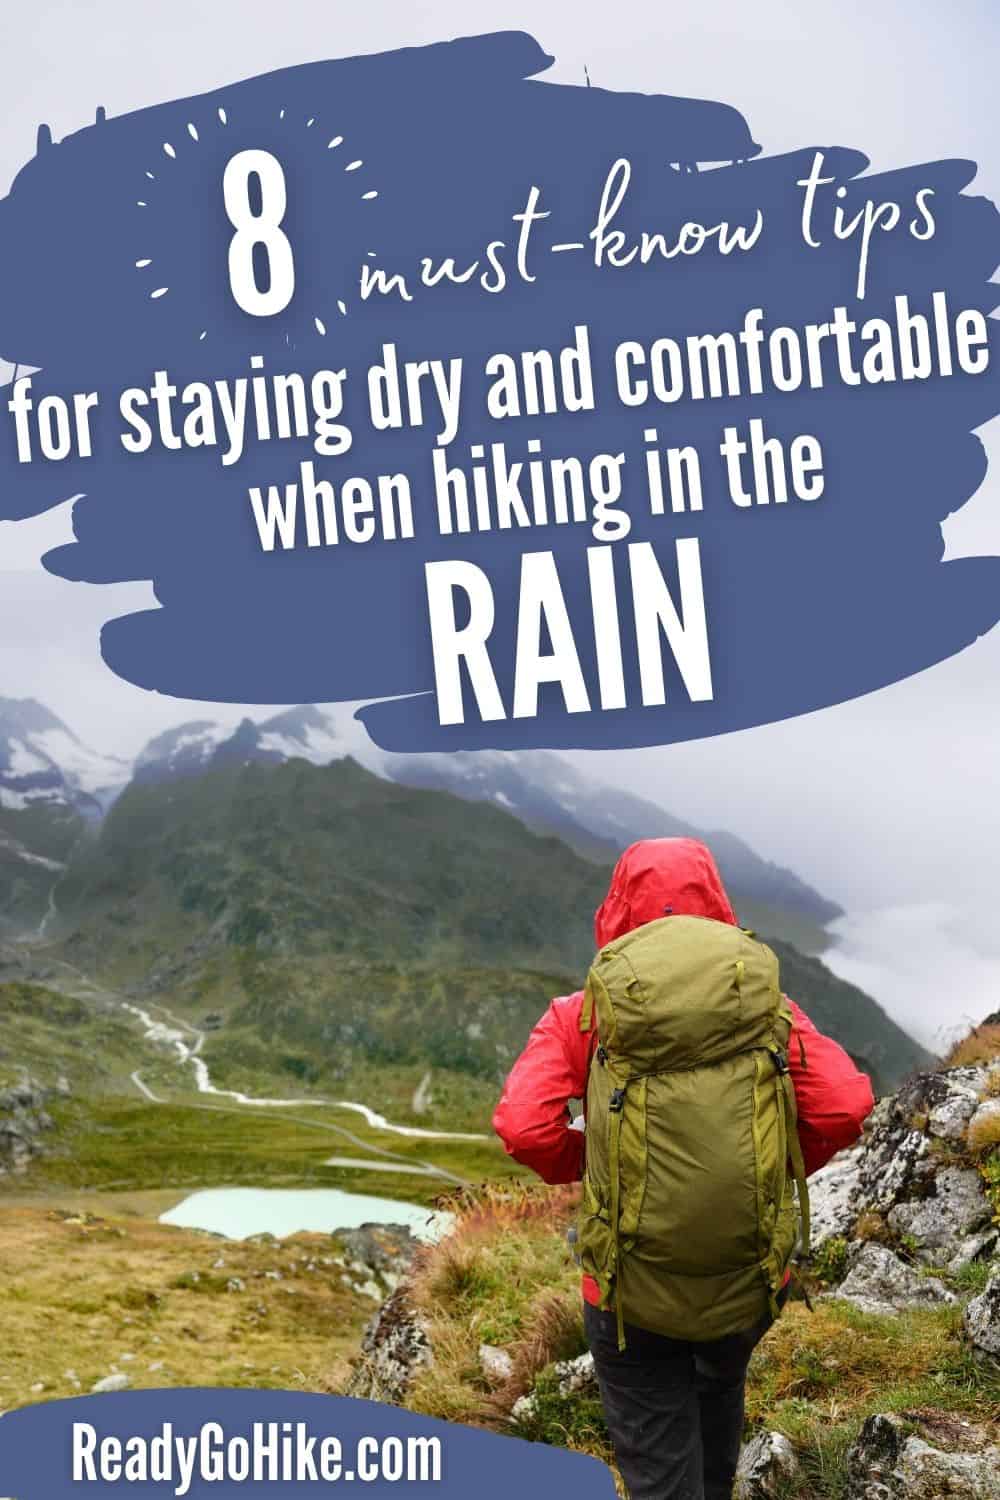 Hiker walking in rain with text overlay 8 Must-Know Tips fo Staying Dry and Comfortable When Hiking in the Rain